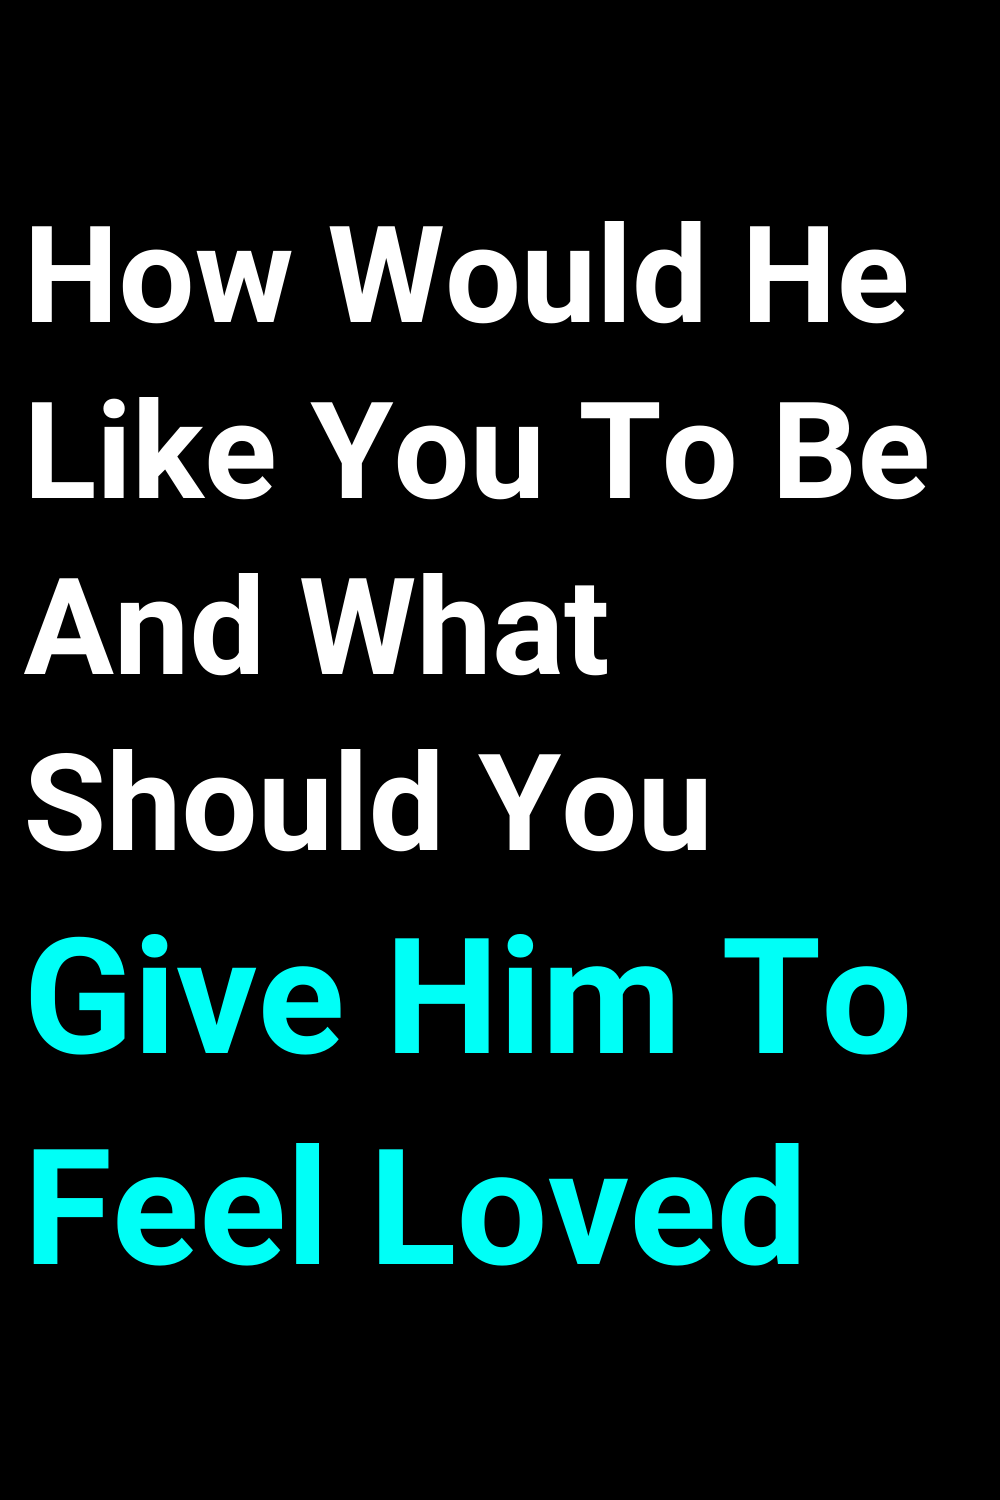 How Would He Like You To Be And What Should You Give Him To Feel Loved